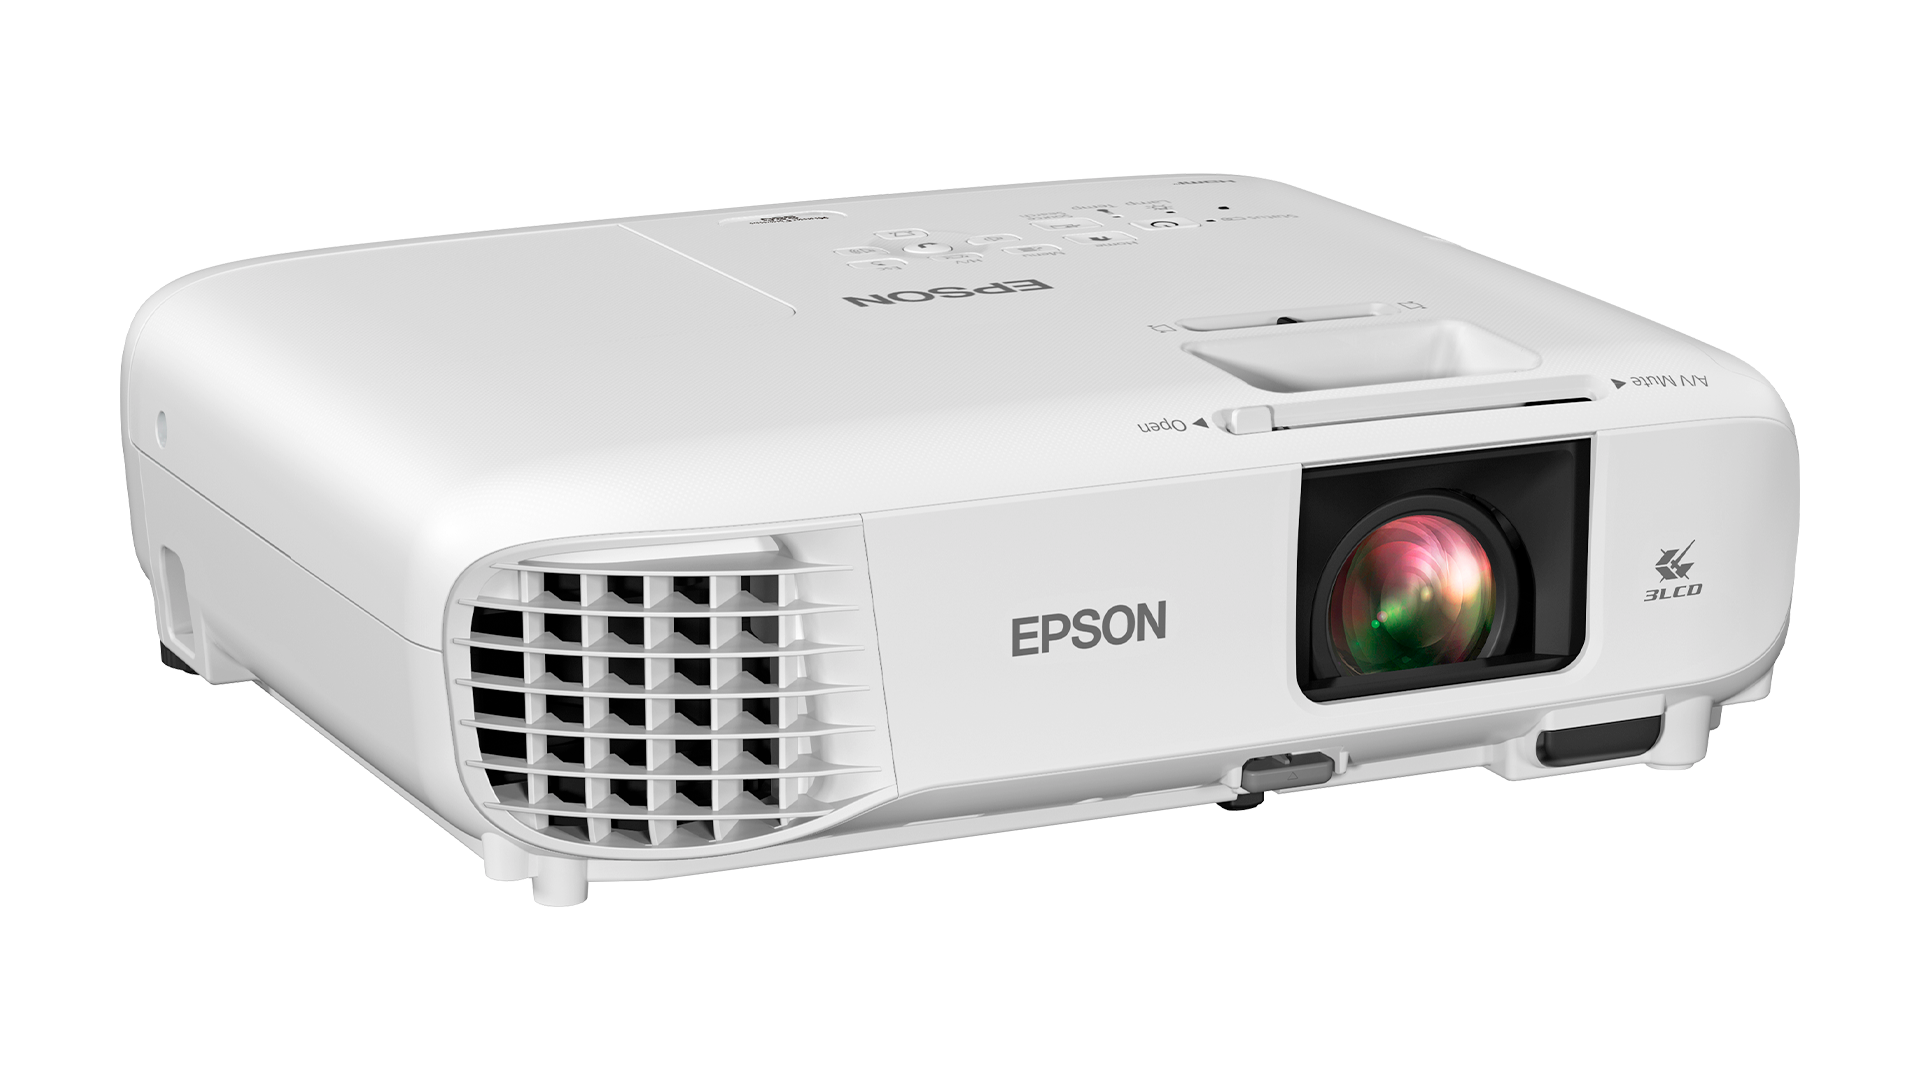 The Epson 880X 3LCD 1080p Smart Portable Projector on a white background